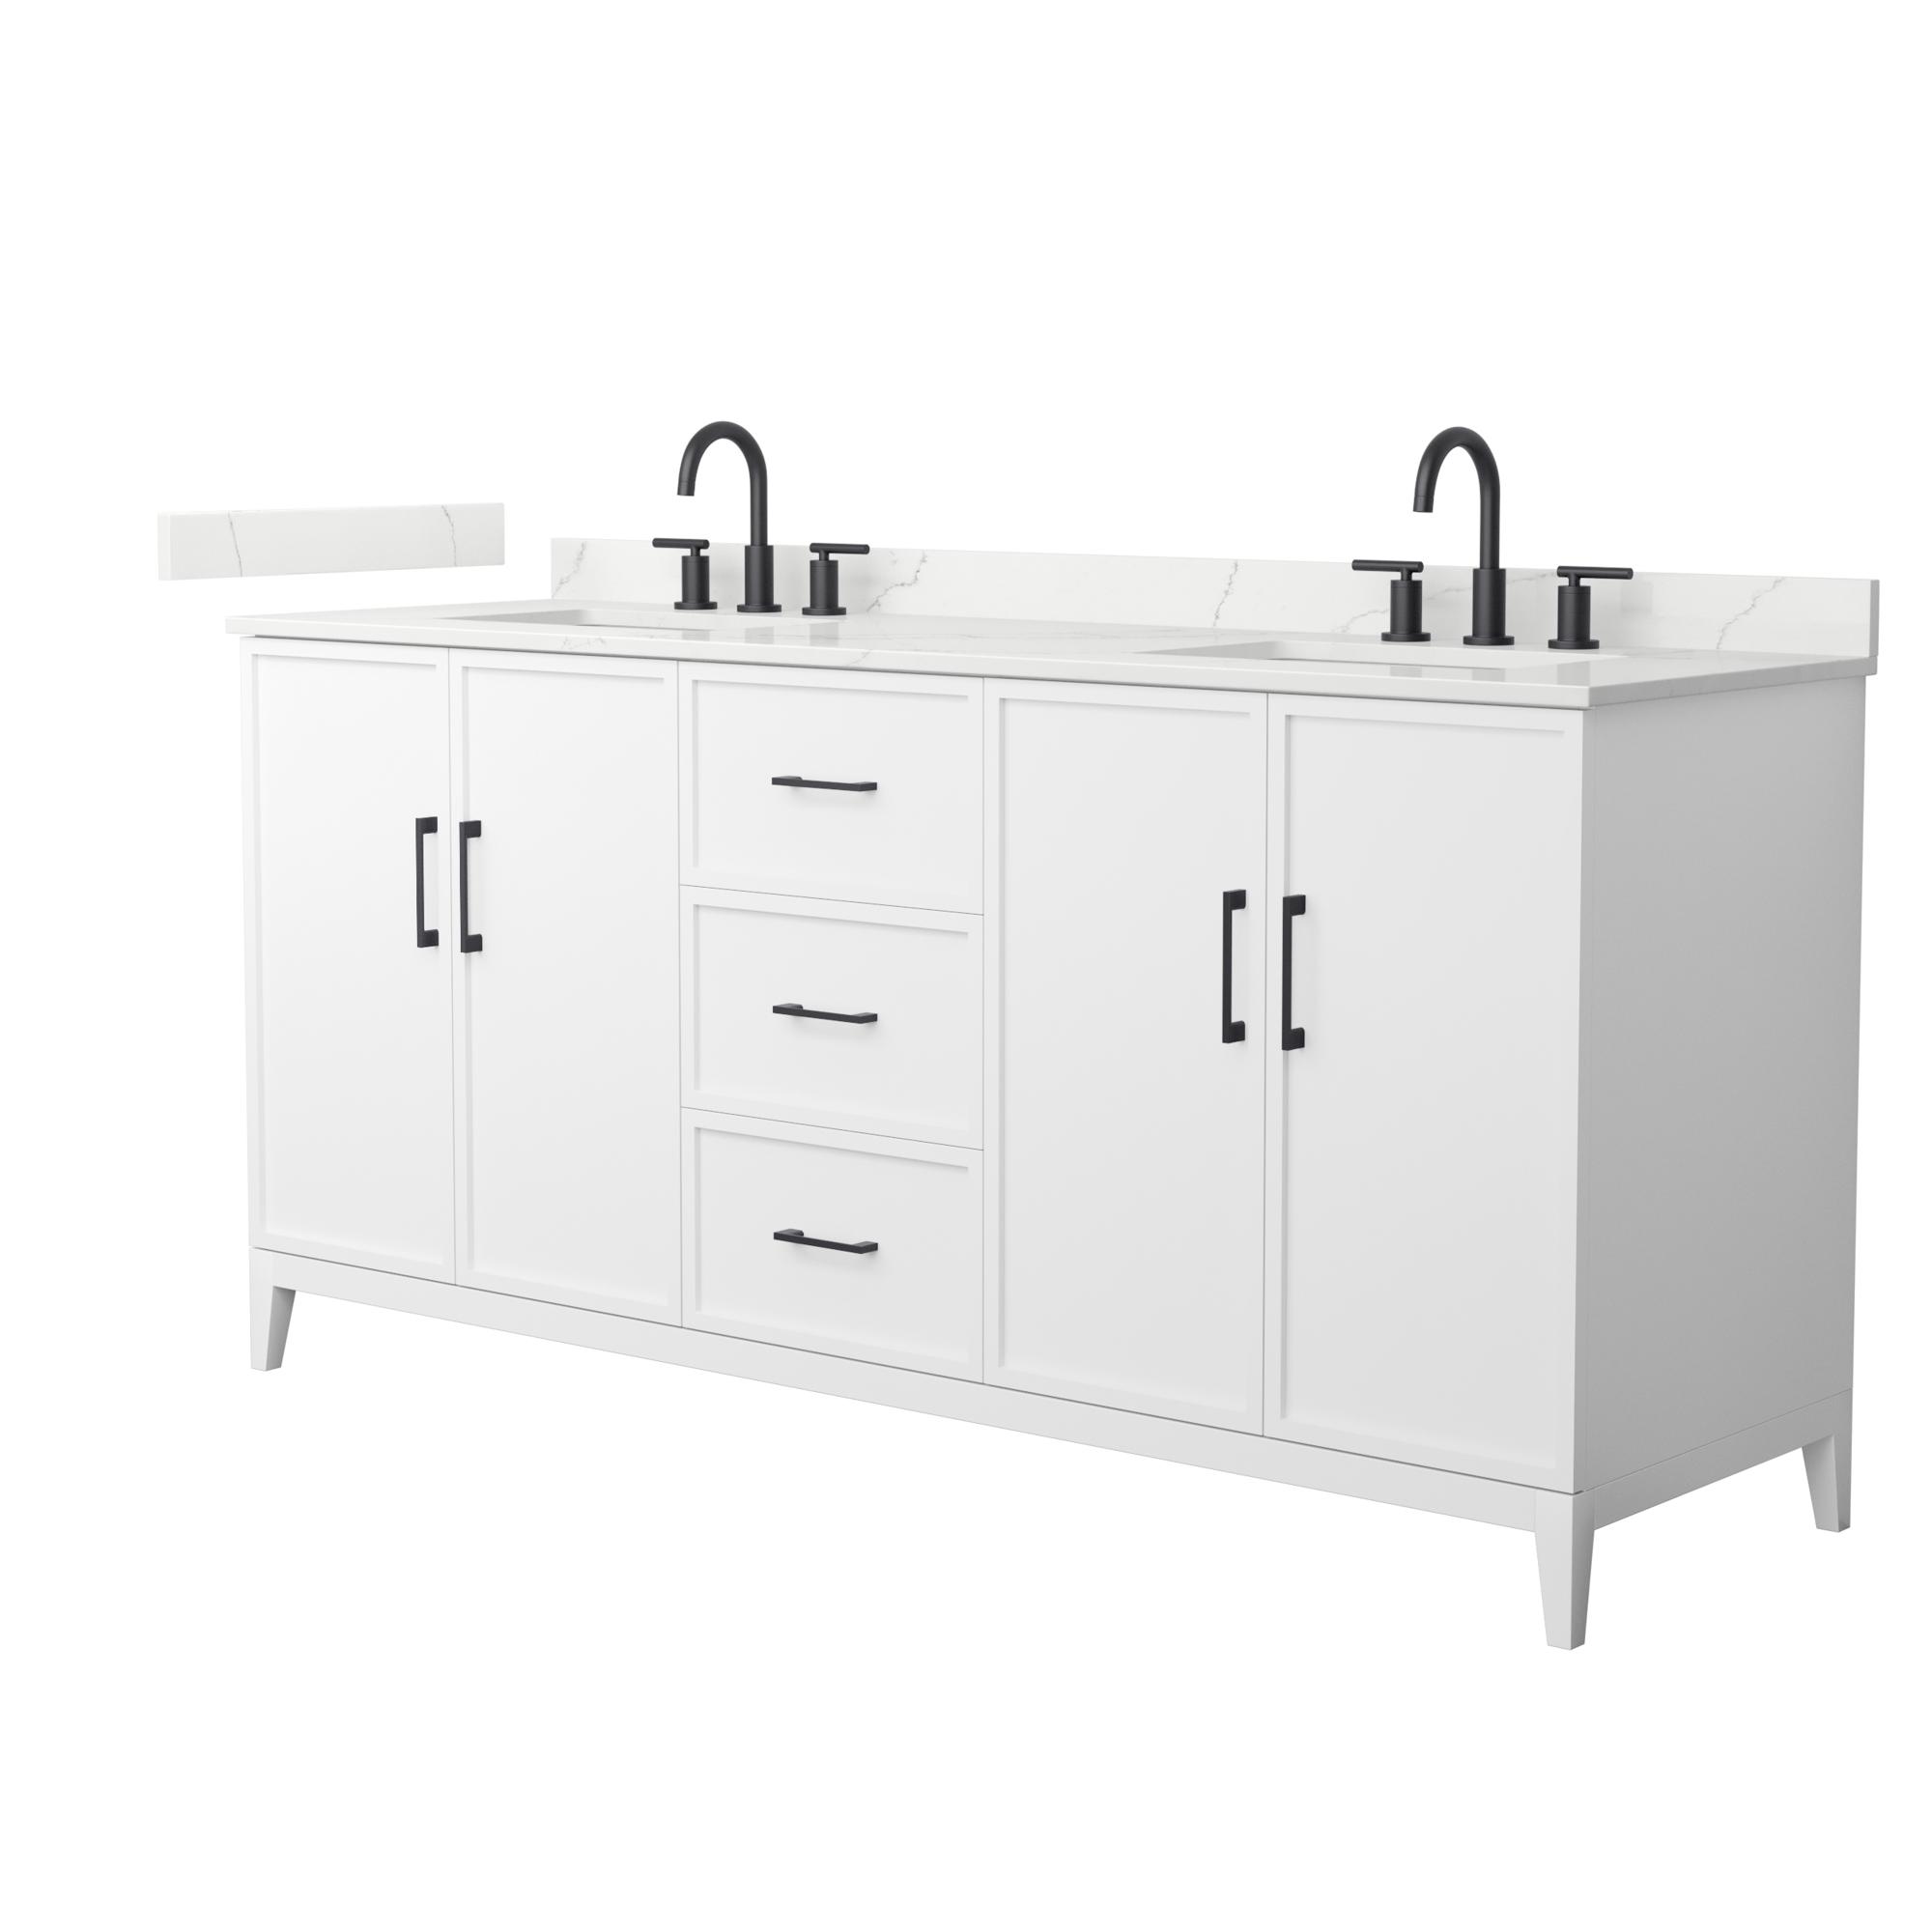 72" Transitional Double Vanity Base in White, 7 Top Options with 2 Hardware Option